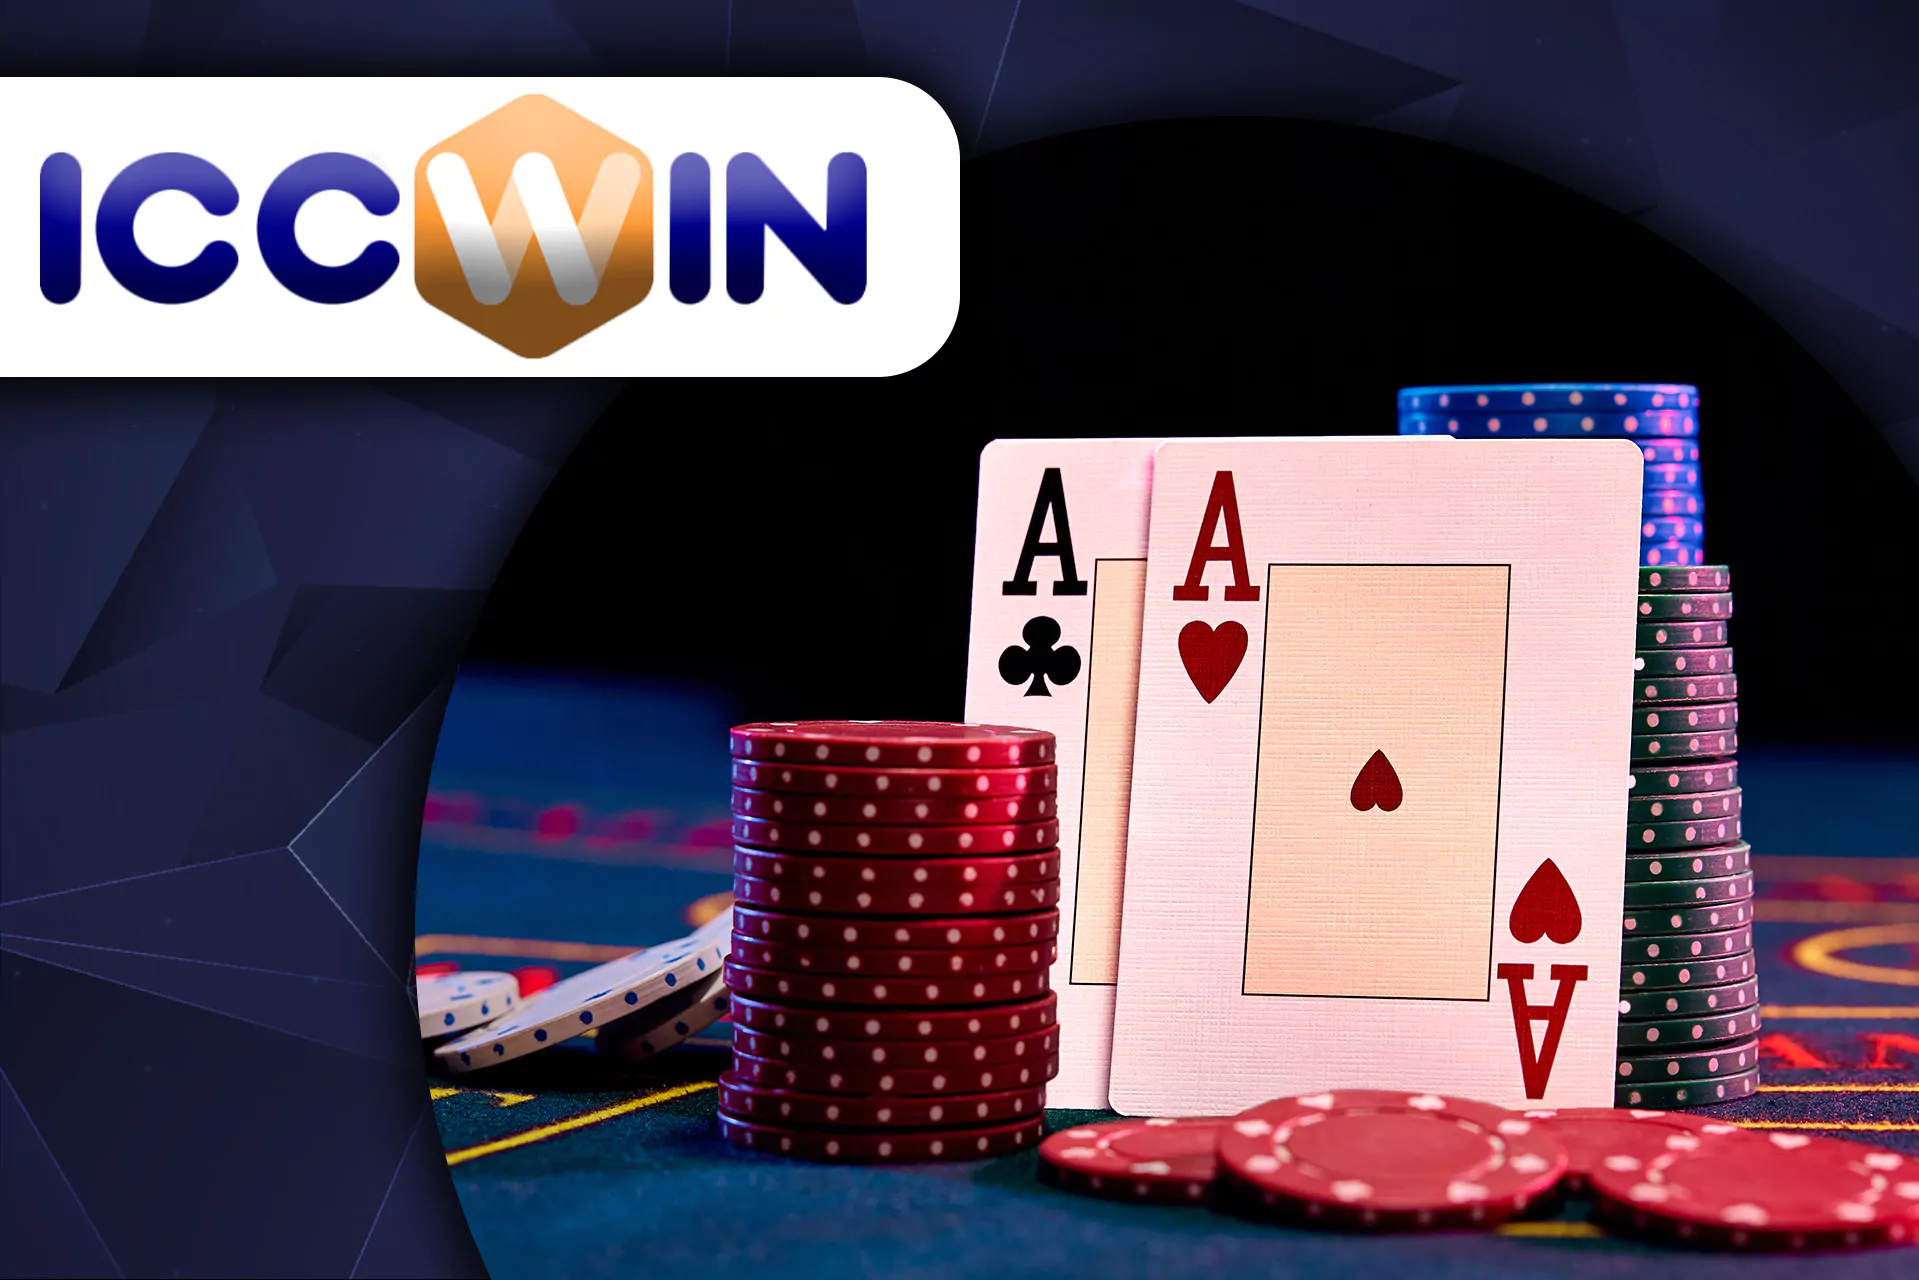 Play poker and other card games in the ICCWIN casino.